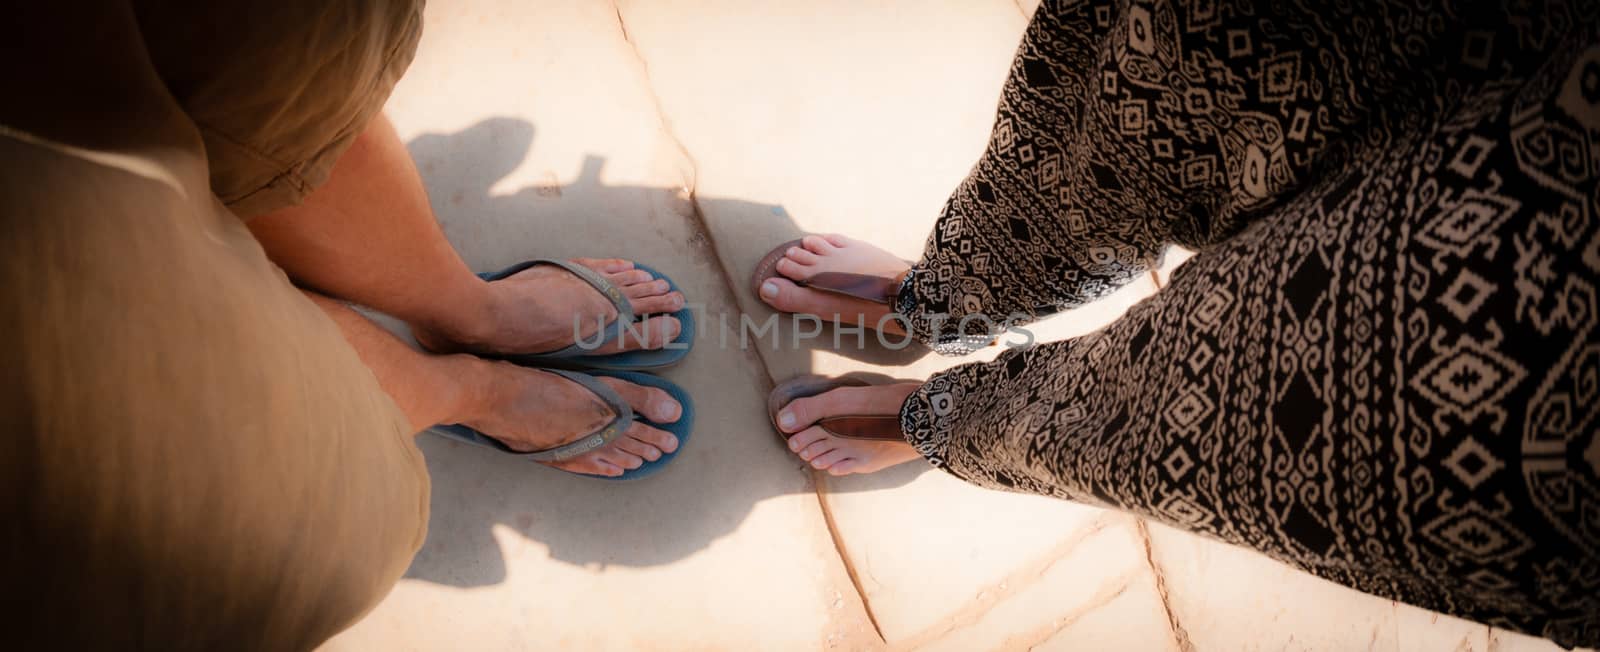 Top view of two pair dirty foot with flip flops by attiarndt